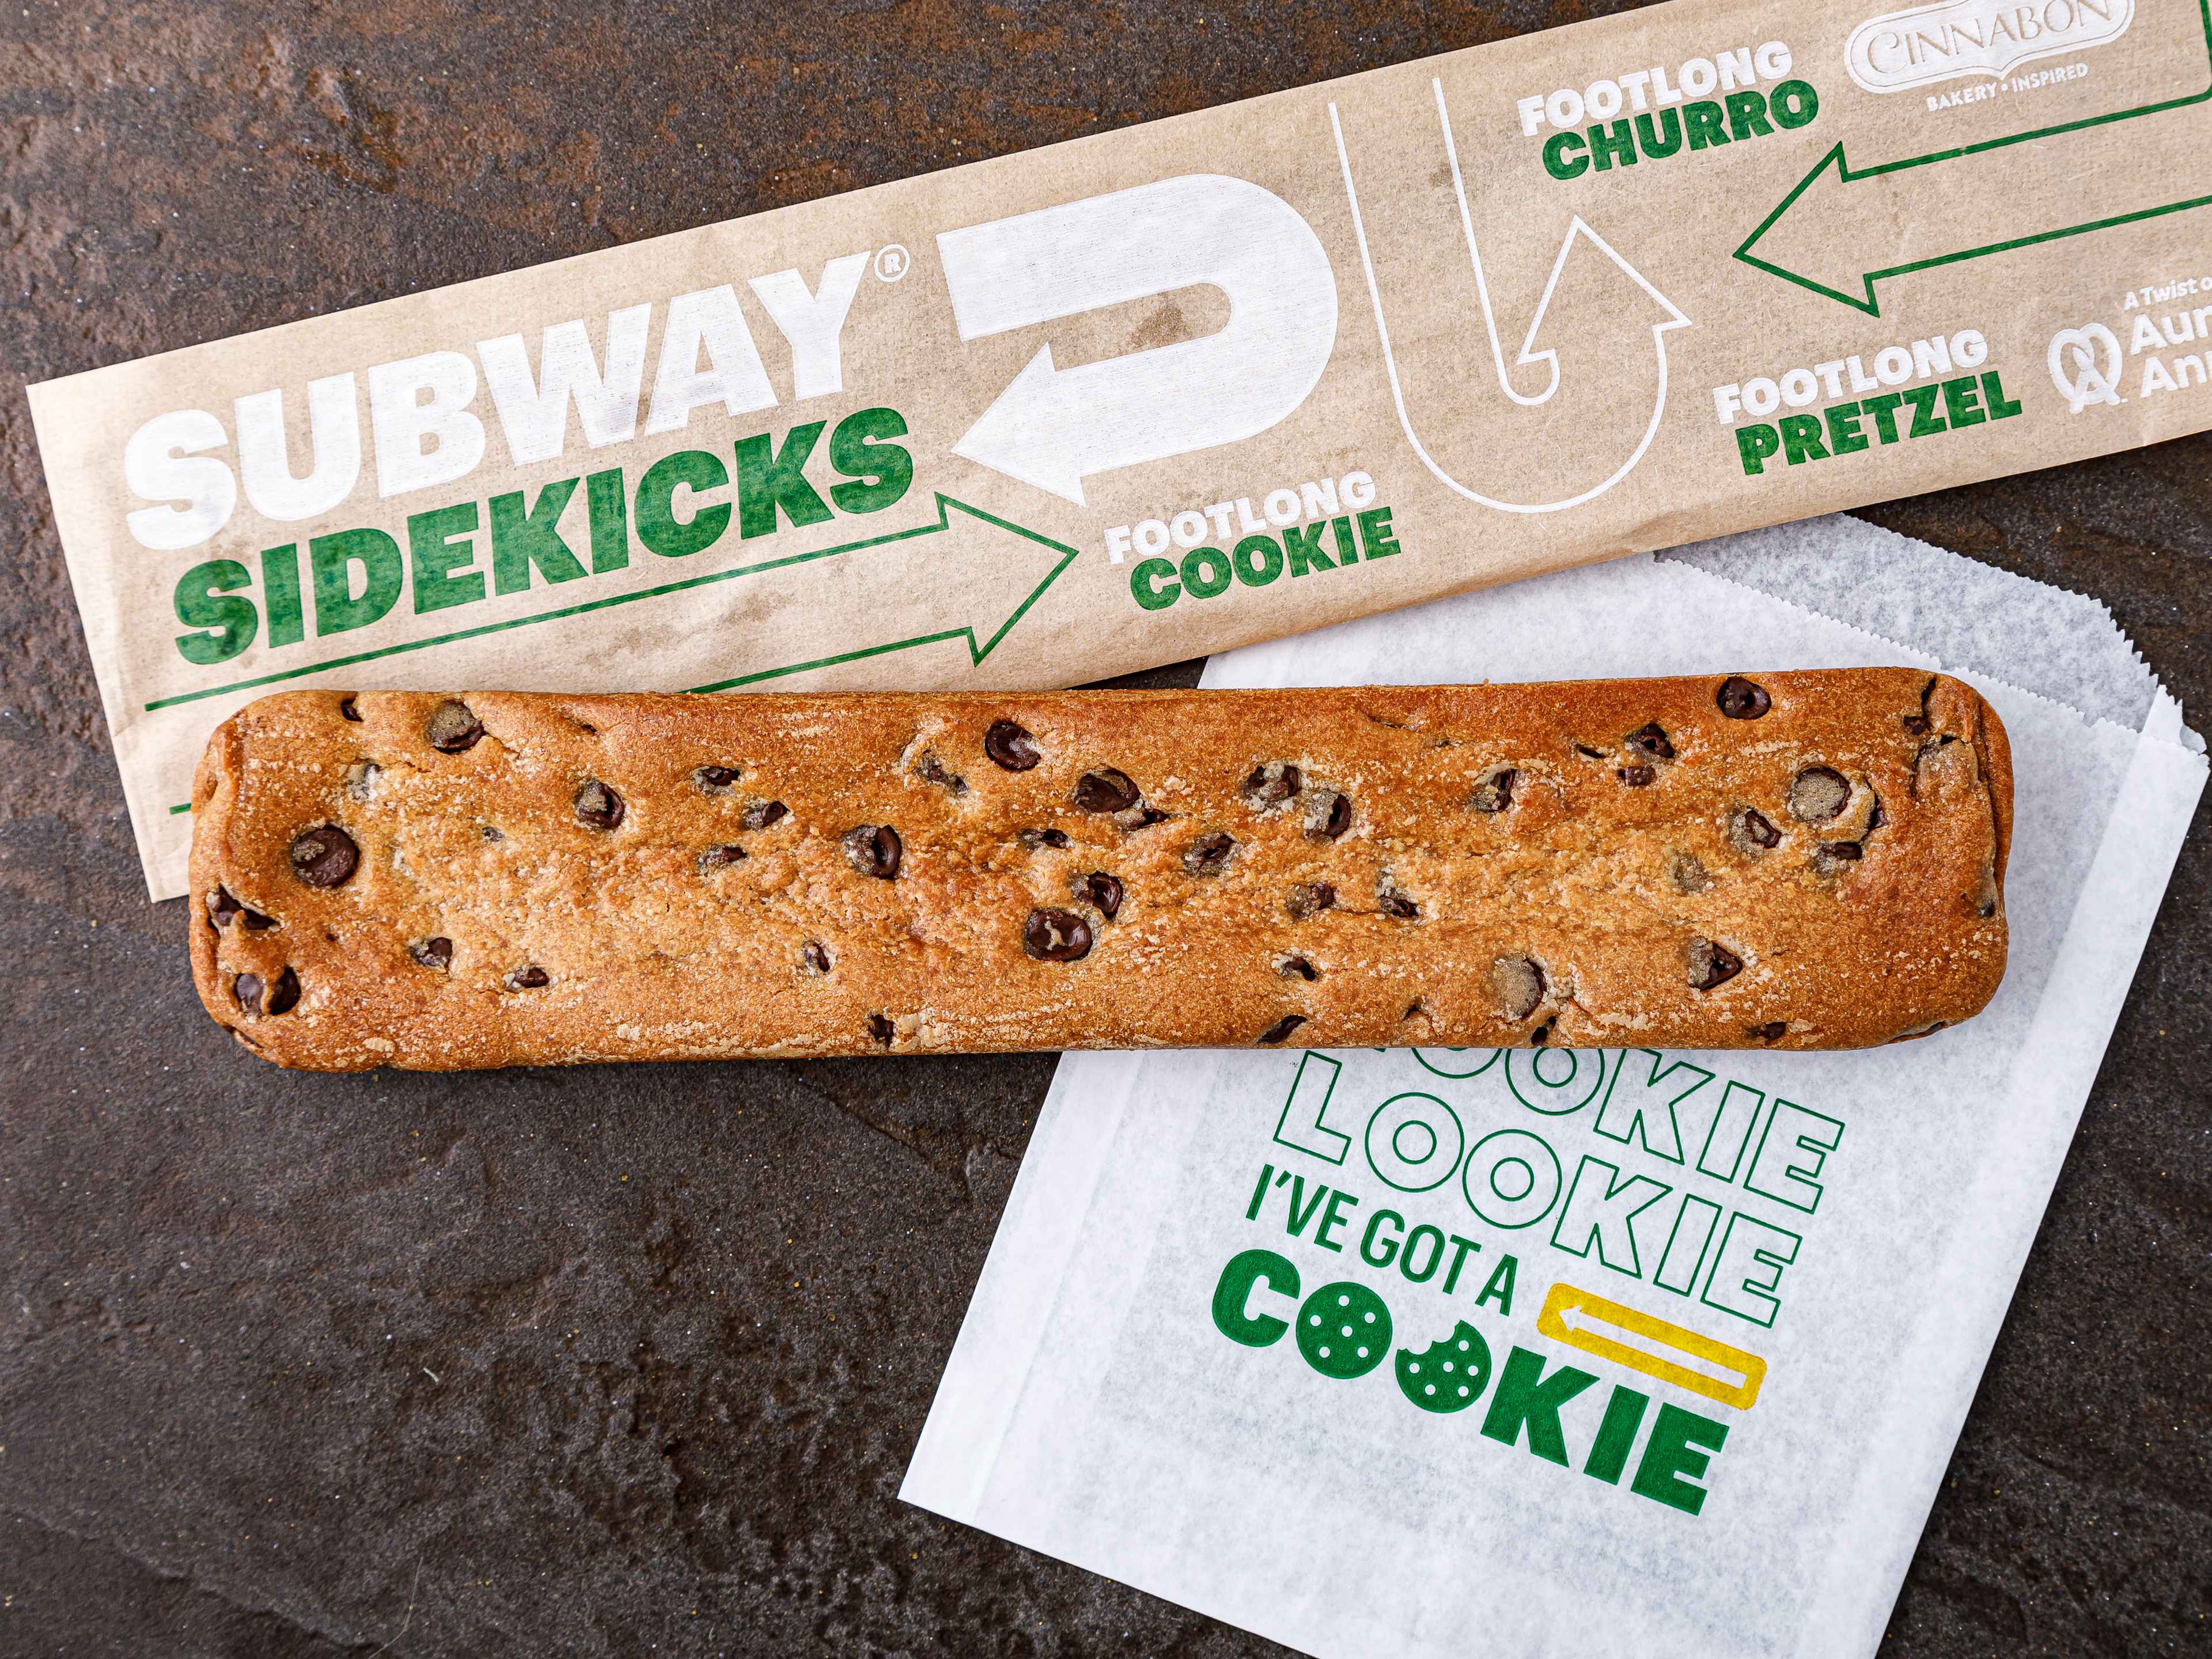 a footlong cookie from Subway